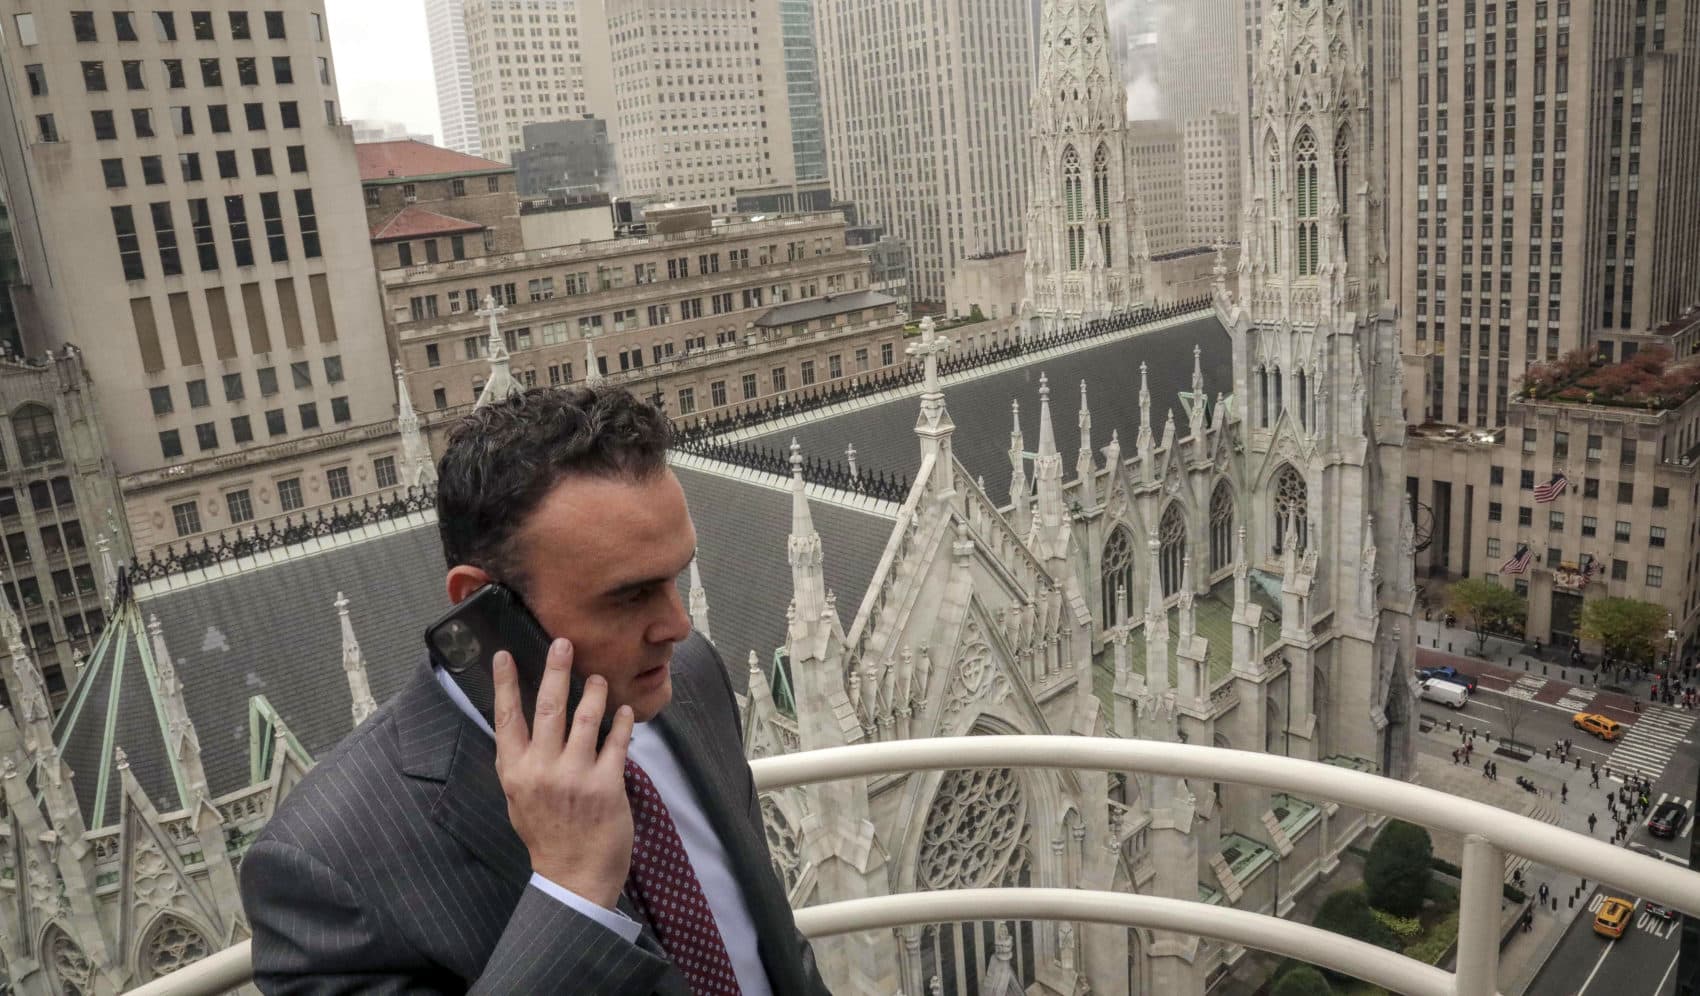 Attorney Adam Slater takes a phone call on a patio outside his high-rise Manhattan office overlooking St. Patrick's Cathedral, in New York. Slater's firm is representing clients accusing the Roman Catholic Church of sexual abuse. (Bebeto Matthews/AP)